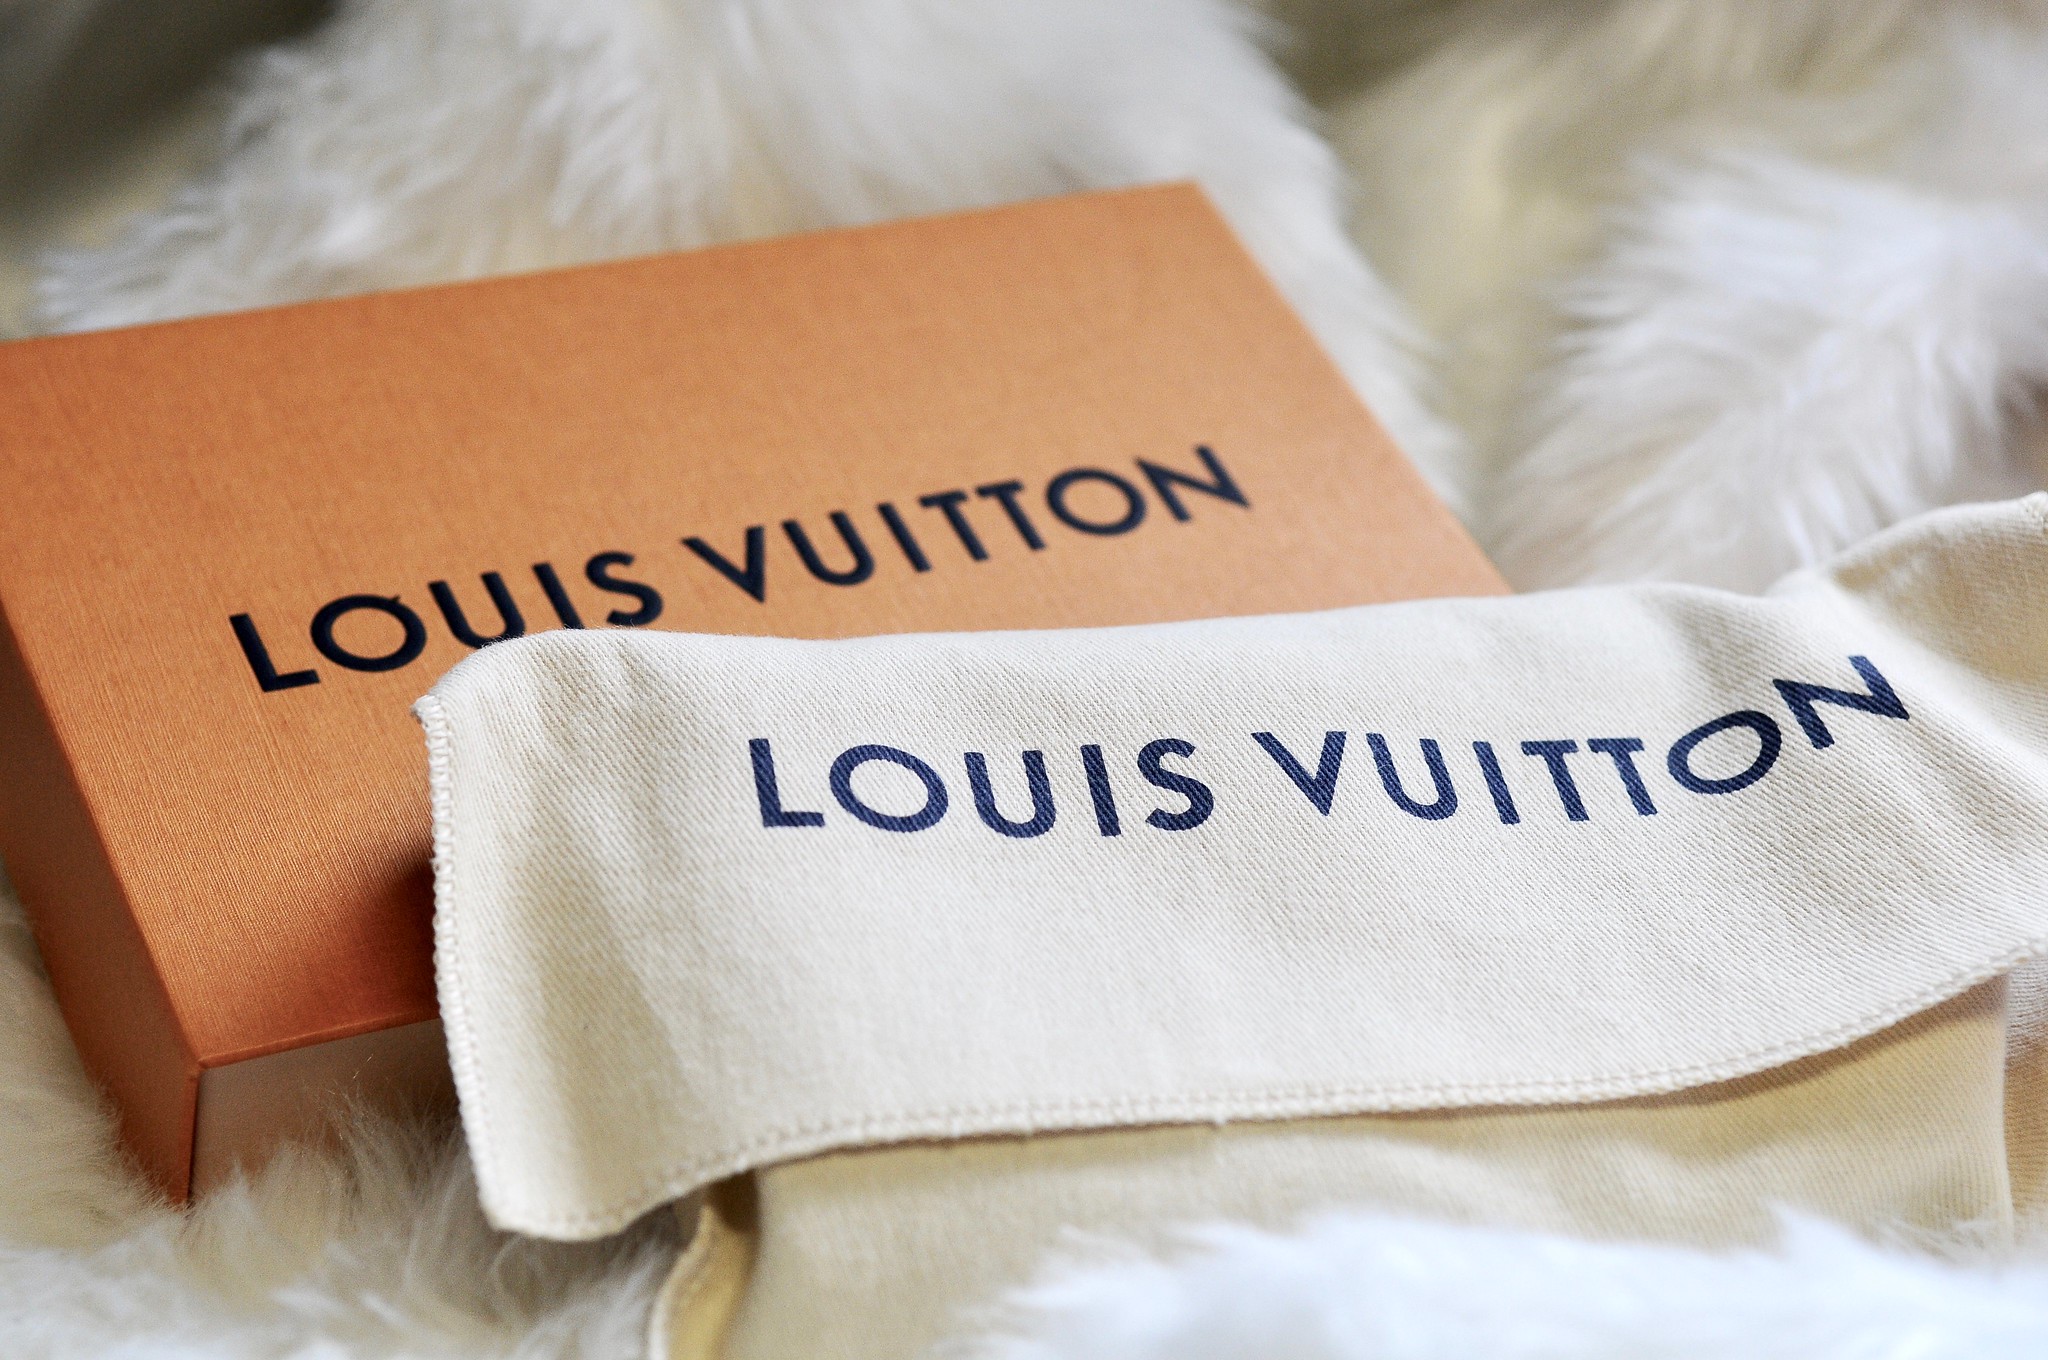 LOUIS VUITTON AGENDA INSERTS AND AGENDA PM REVIEW 